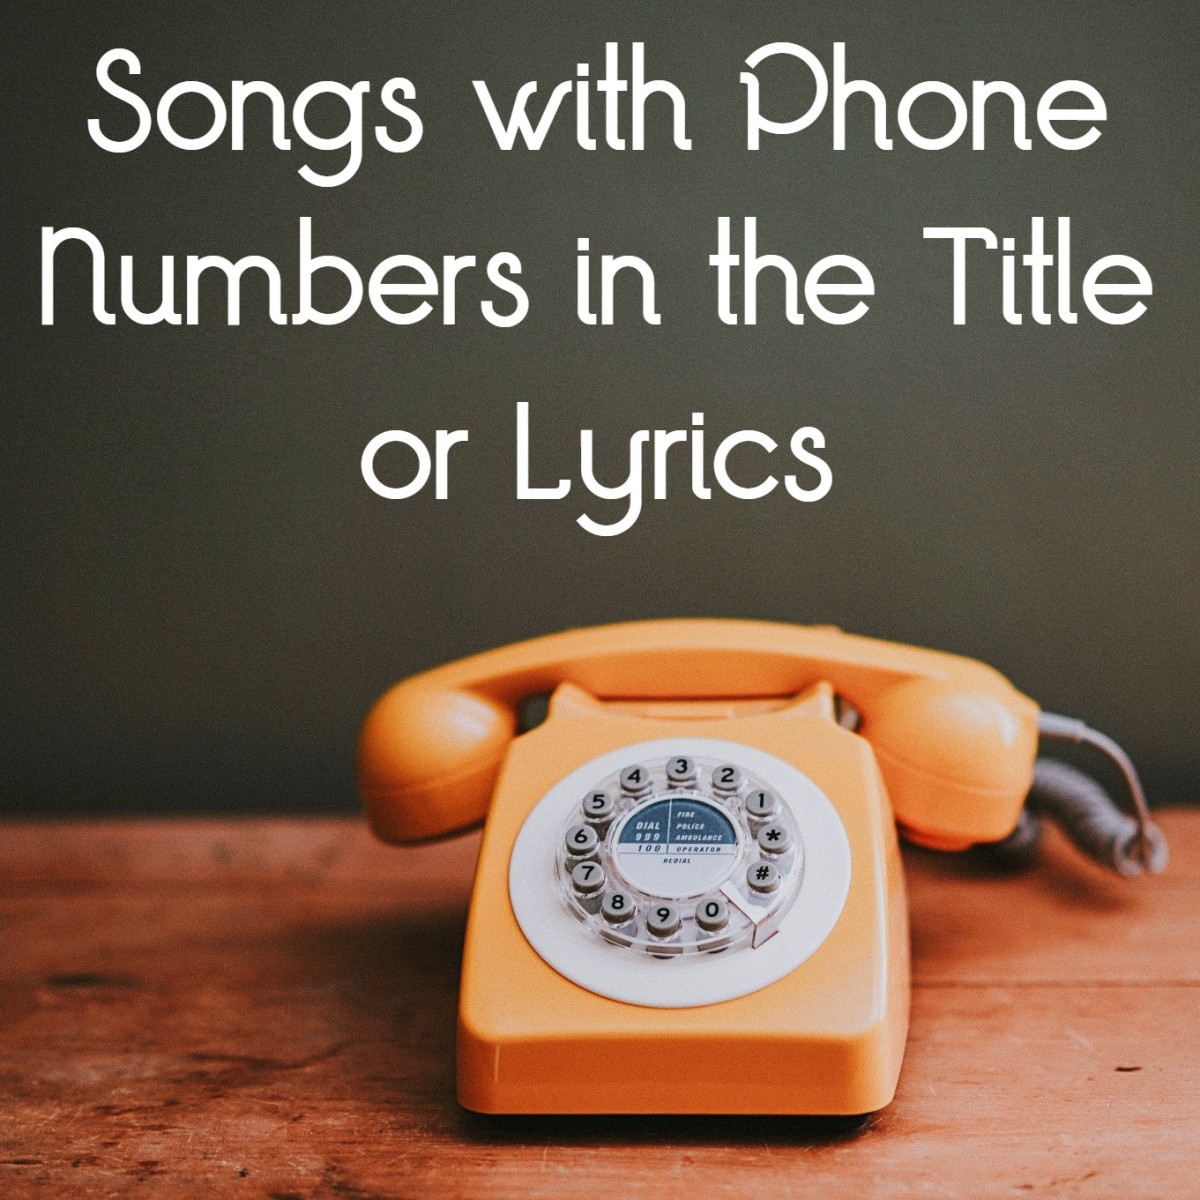 Celebrate phone numbers in lyrics and song titles with a phone number song list. Dial up this fun playlist of pop, rock, country, and R&B tunes. 